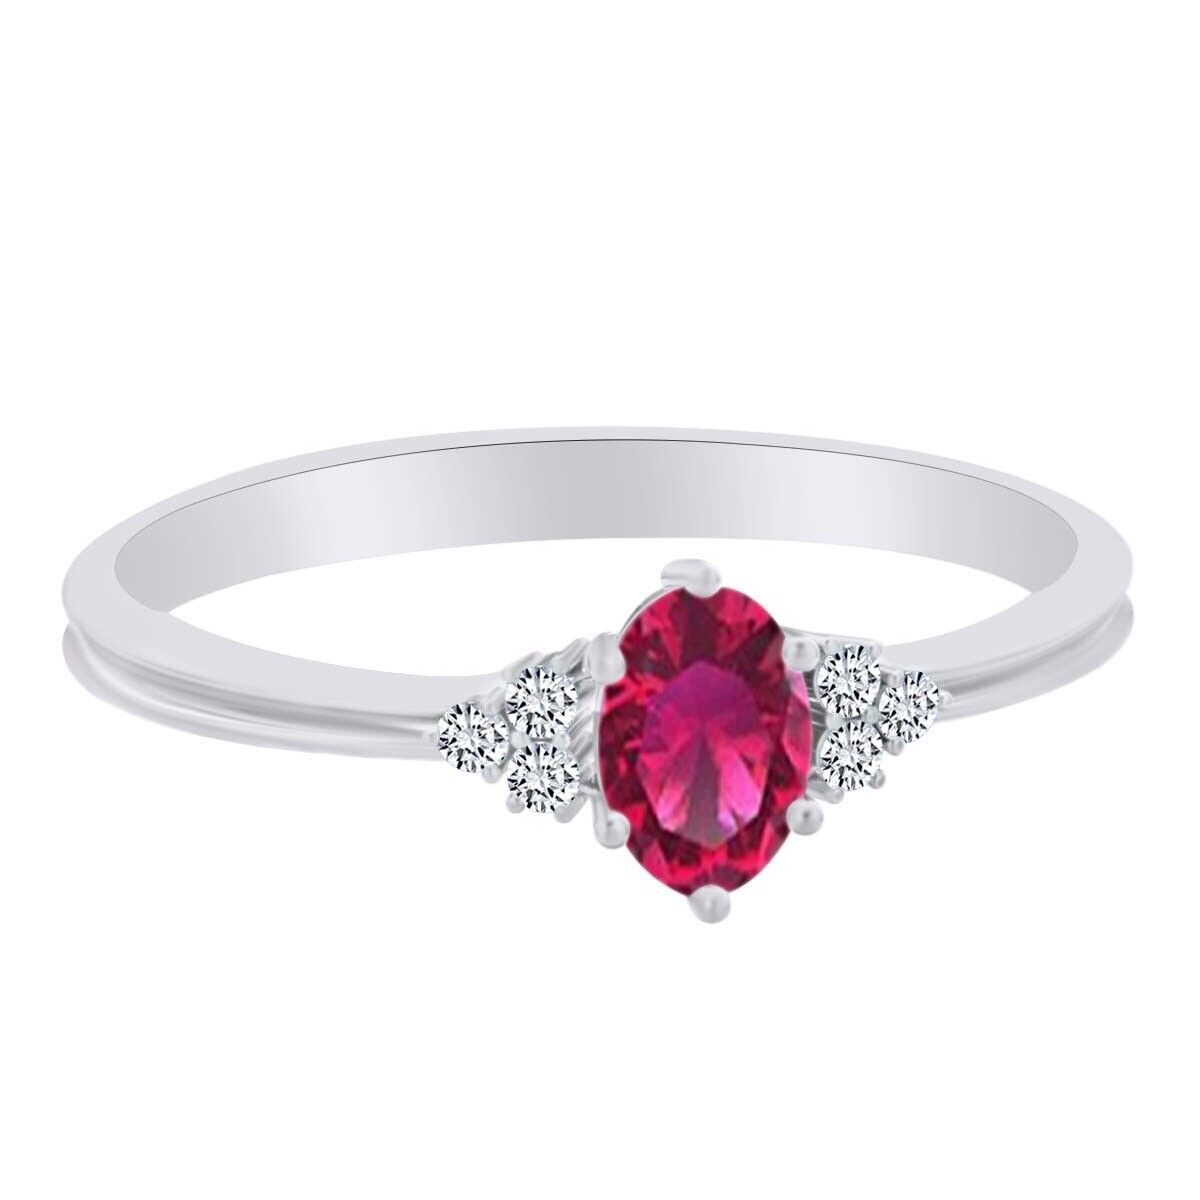 Oval Cut Pink Sapphire Engagement Stackable Promise Ring Solid Sterling  Silver | Ebay For Stackable Oval Cut Sapphire Rings (View 16 of 25)